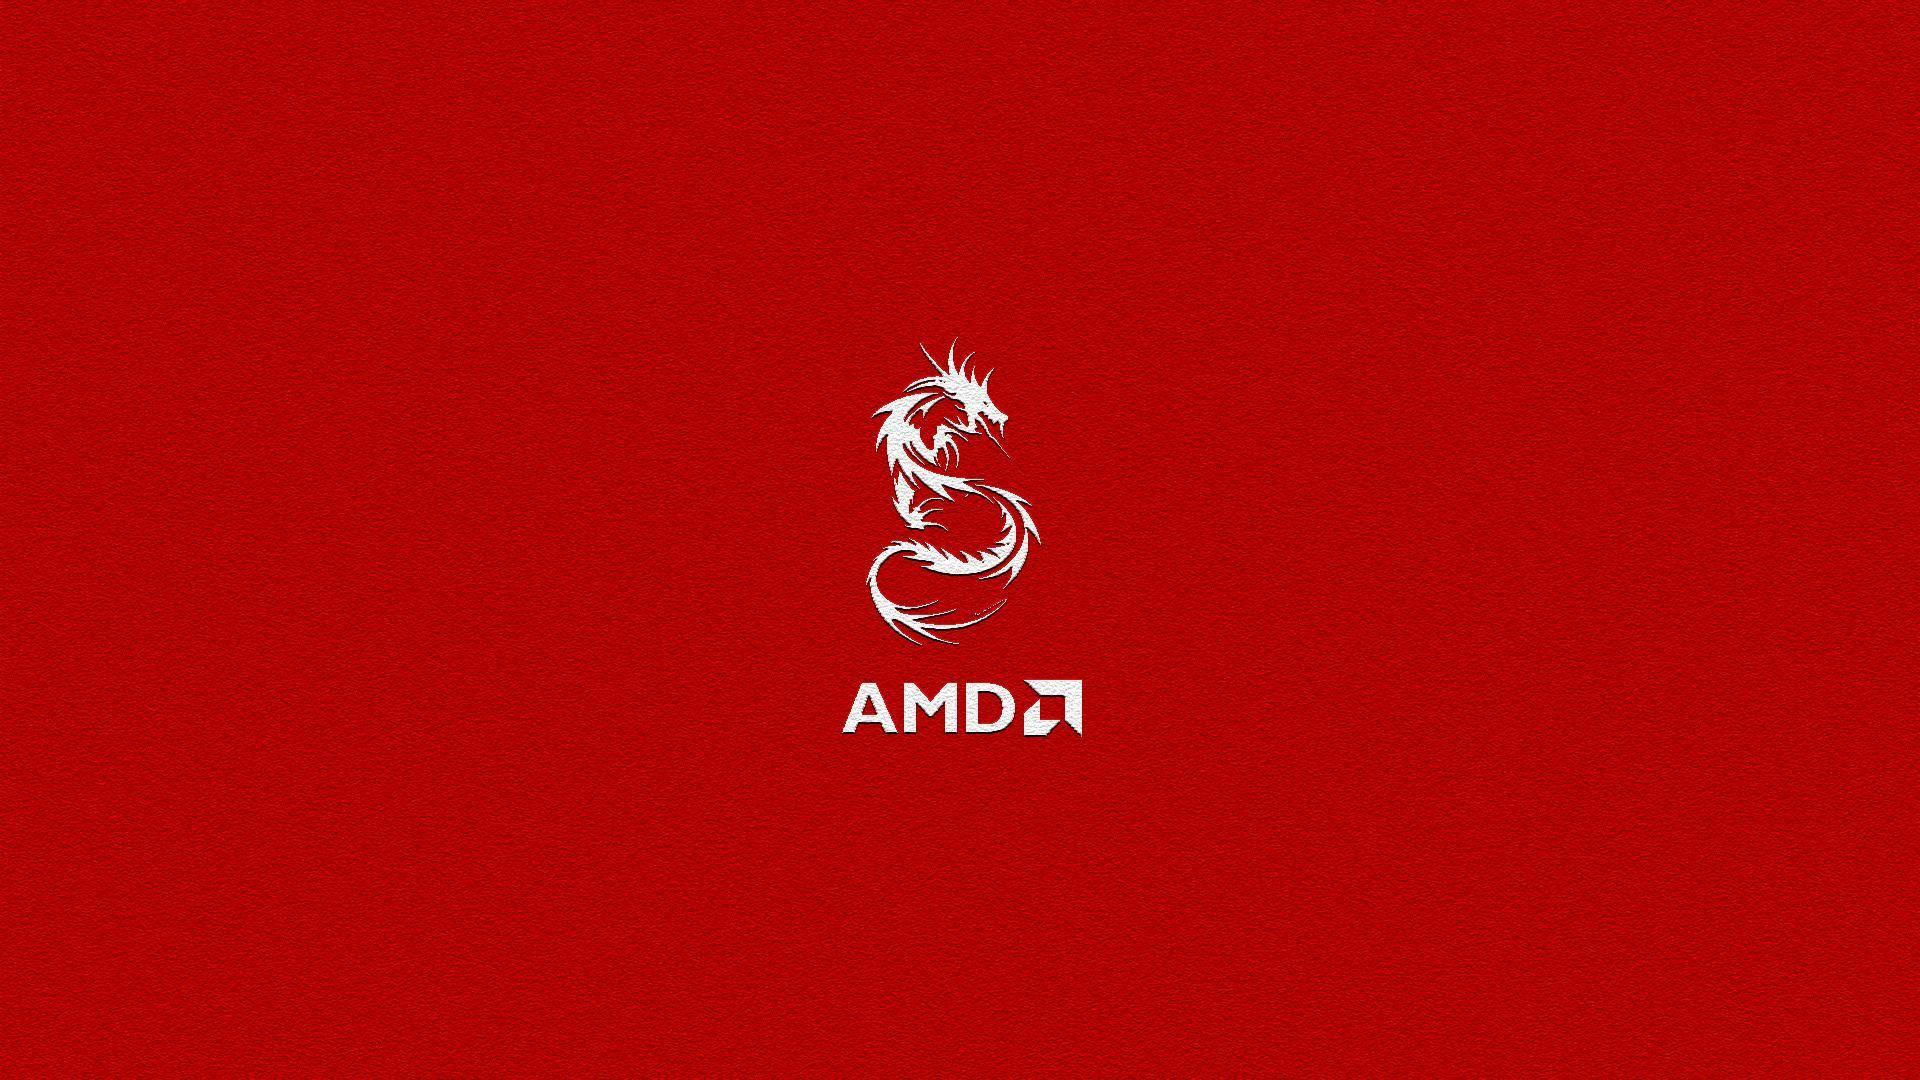 Image For > Amd Wallpapers